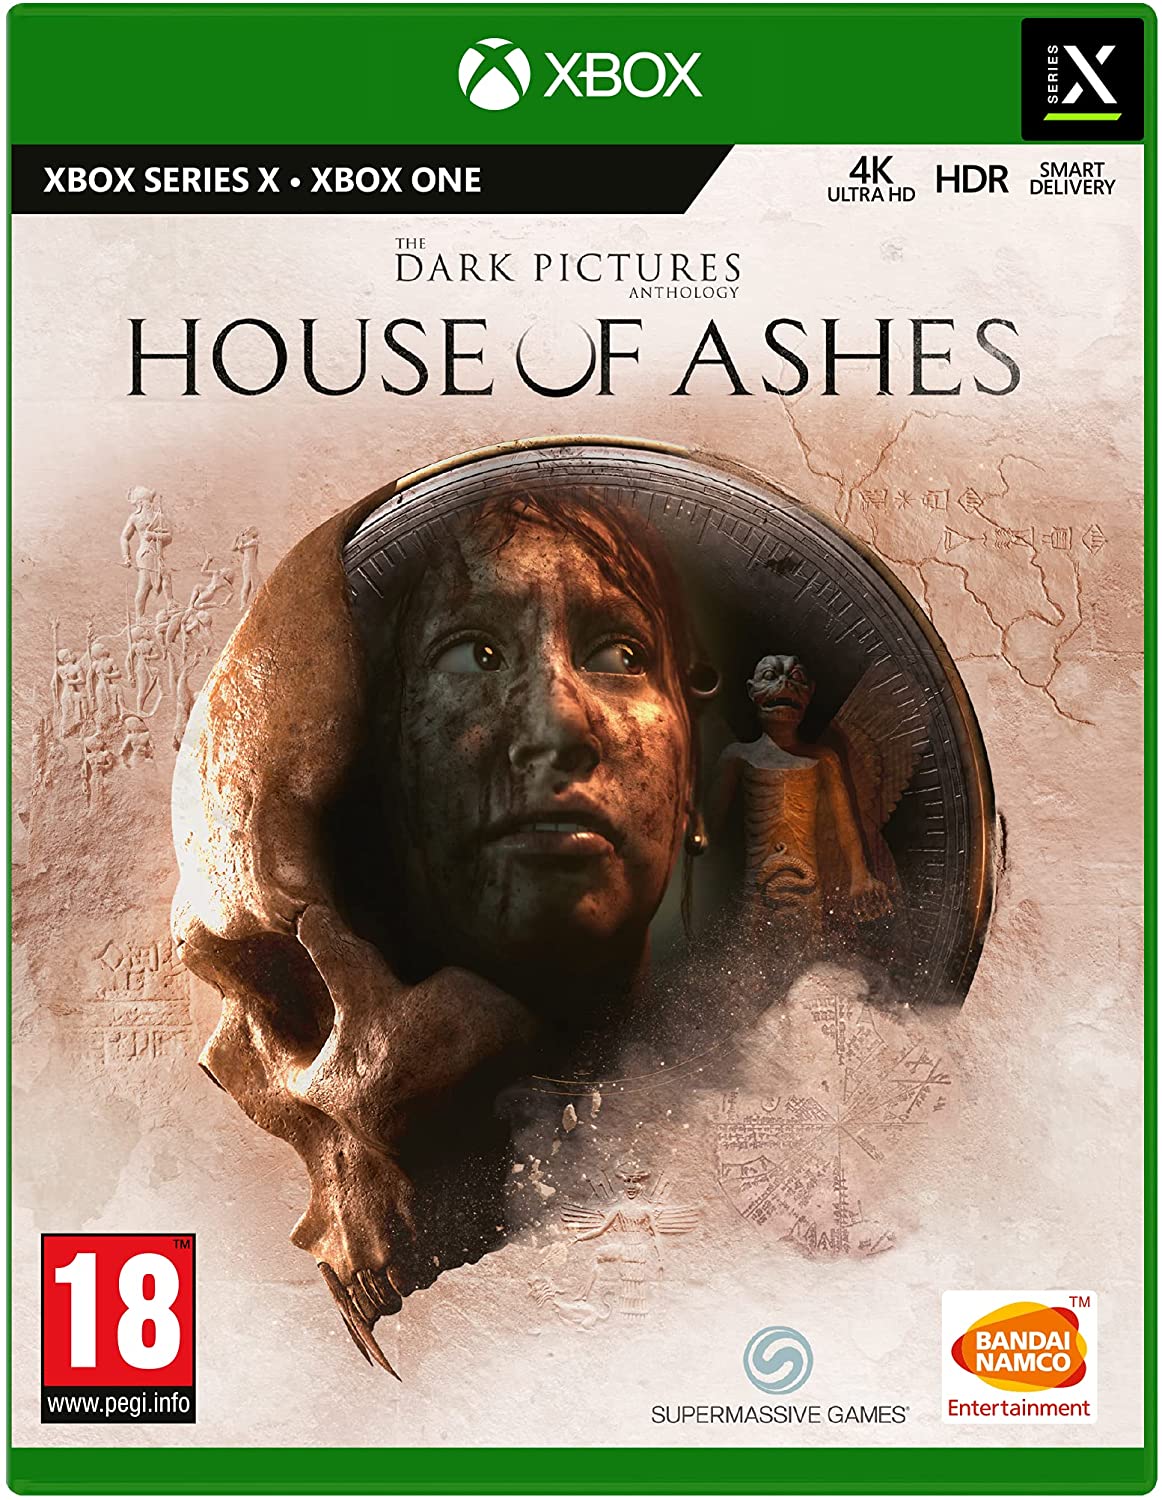 The Dark Pictures Anthology: House of Ashes Digital Download Key (Xbox One/Series X): United Kingdom